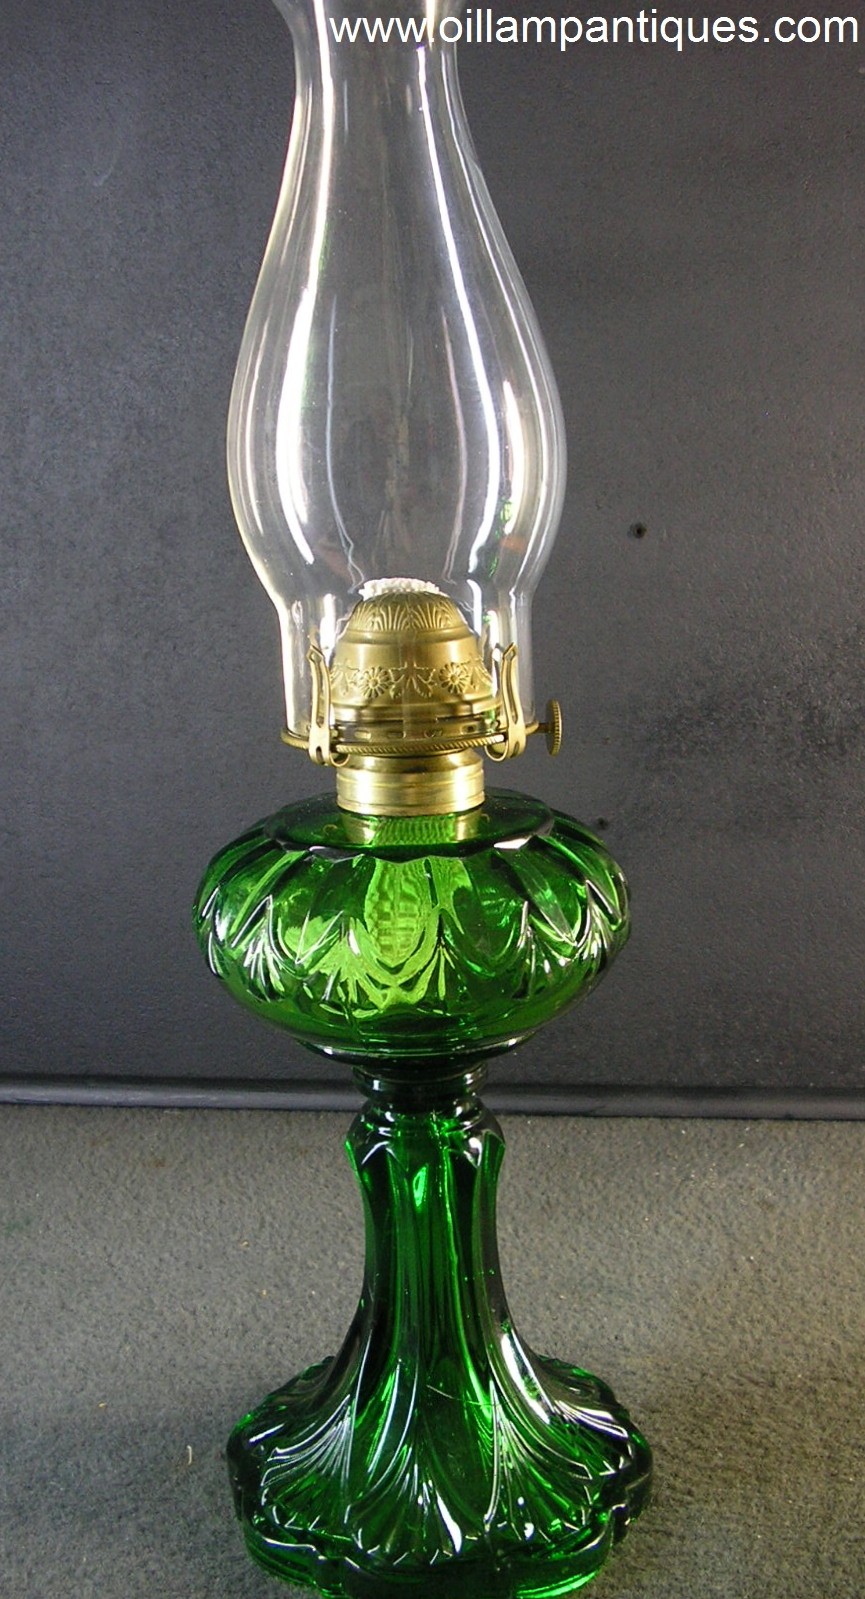 Antique green glass oil lamp oil lamp antiques